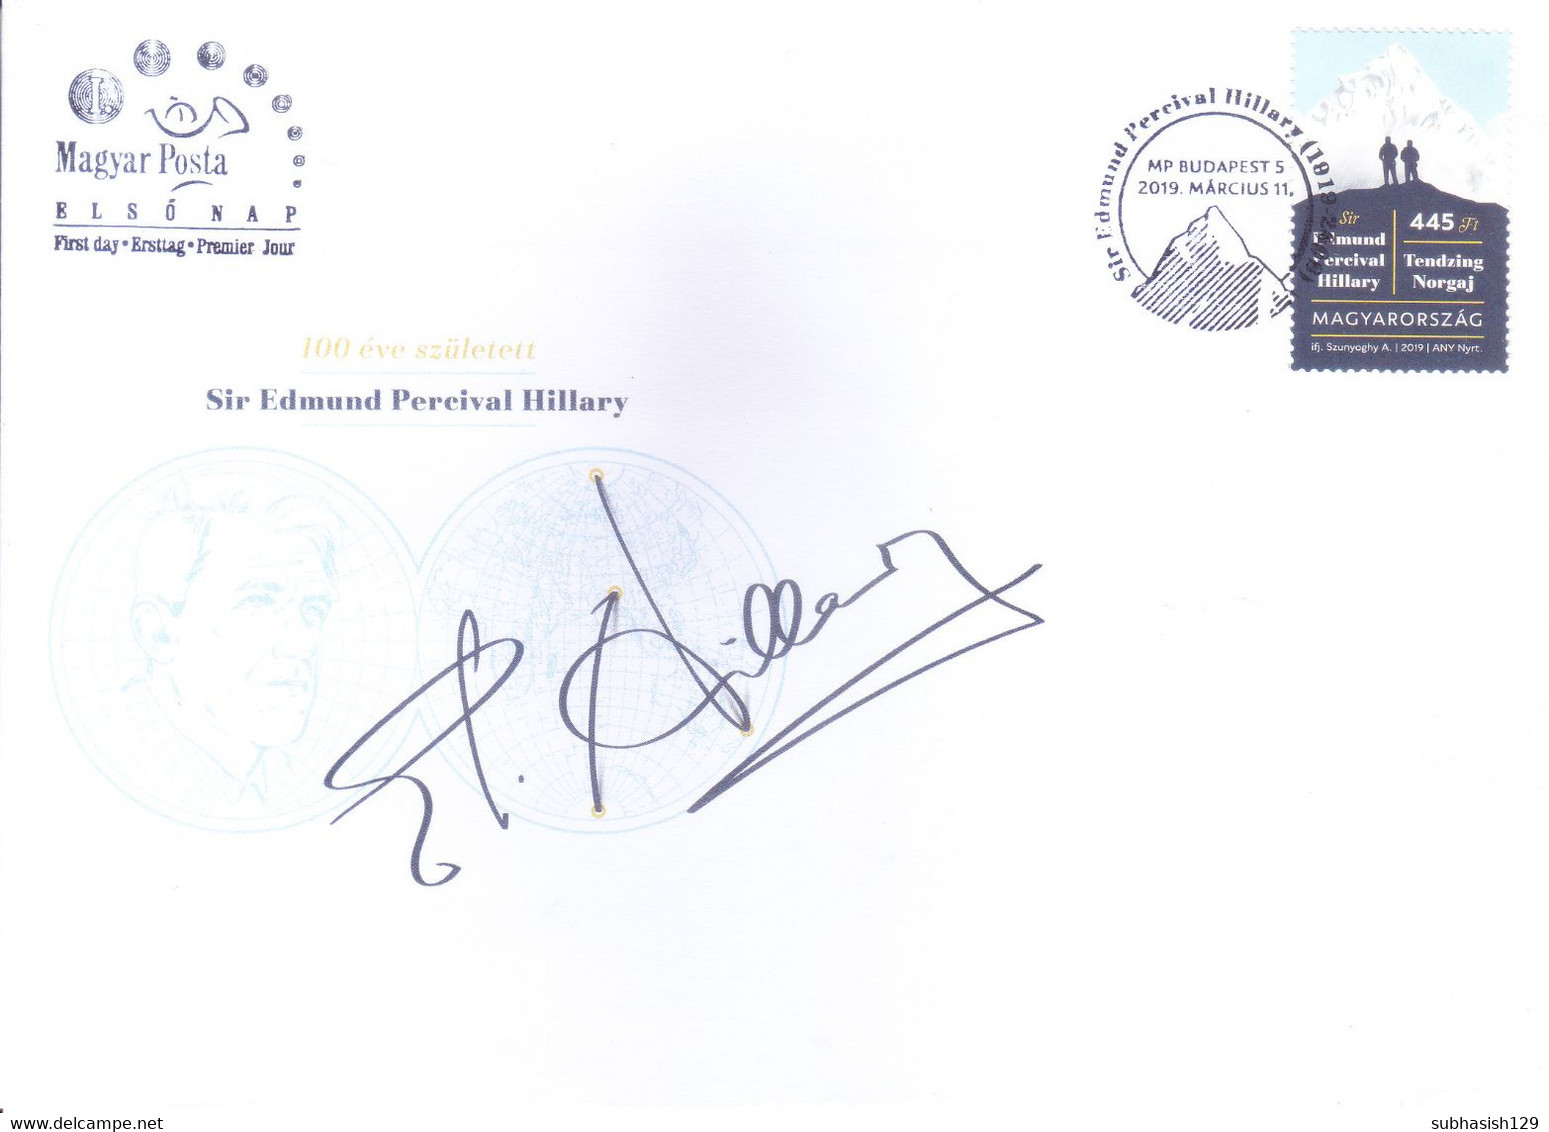 HUNGARY : FIRST DAY COVER : 11 MARCH 2019 : BIRTH CENTENARY OF SIR EDMUND PERCIVAL HILLARY - Lettere